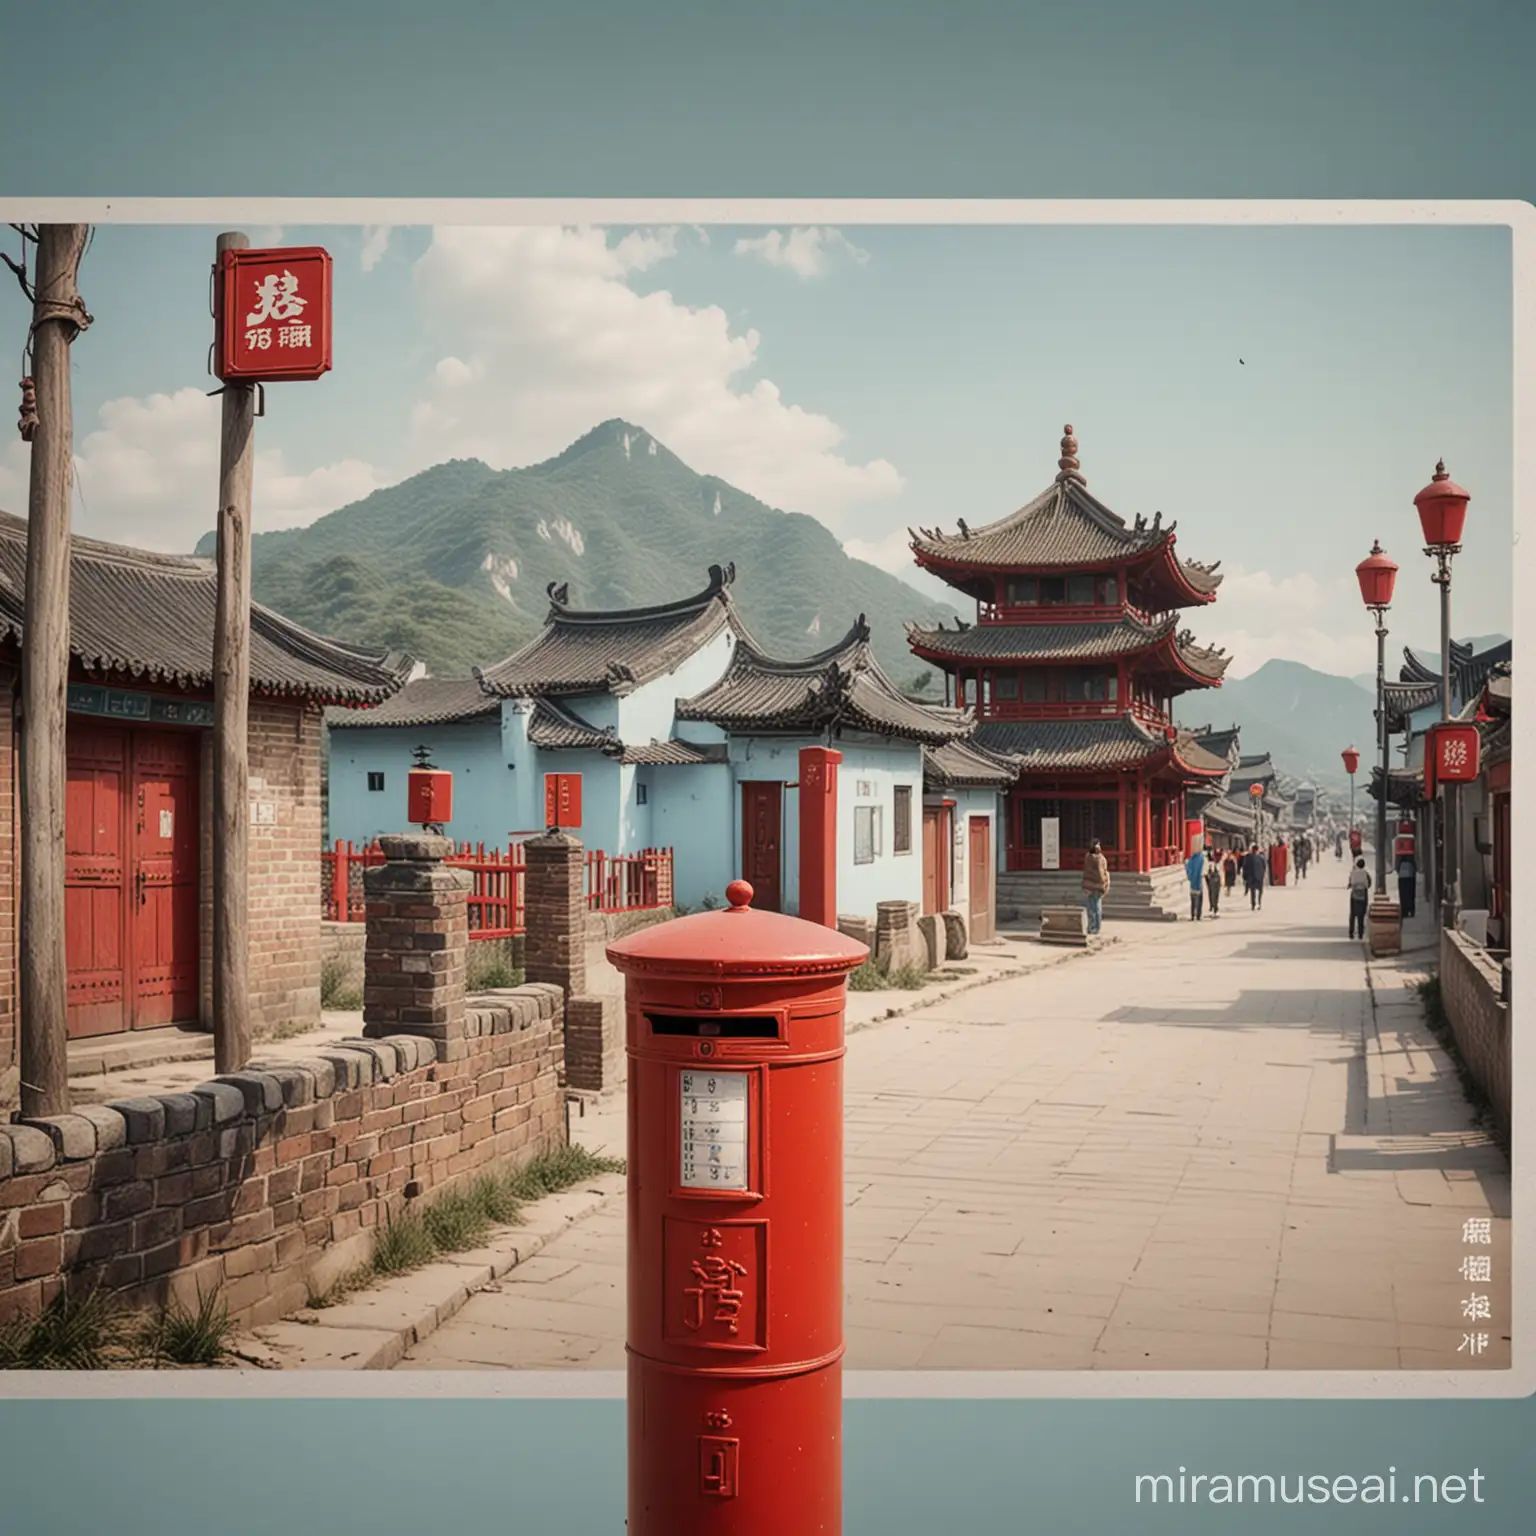 The light blue theme color includes a red post box, several sound postcards promoting red tourism in the old revolutionary areas of China, and the picture is real and high-definition